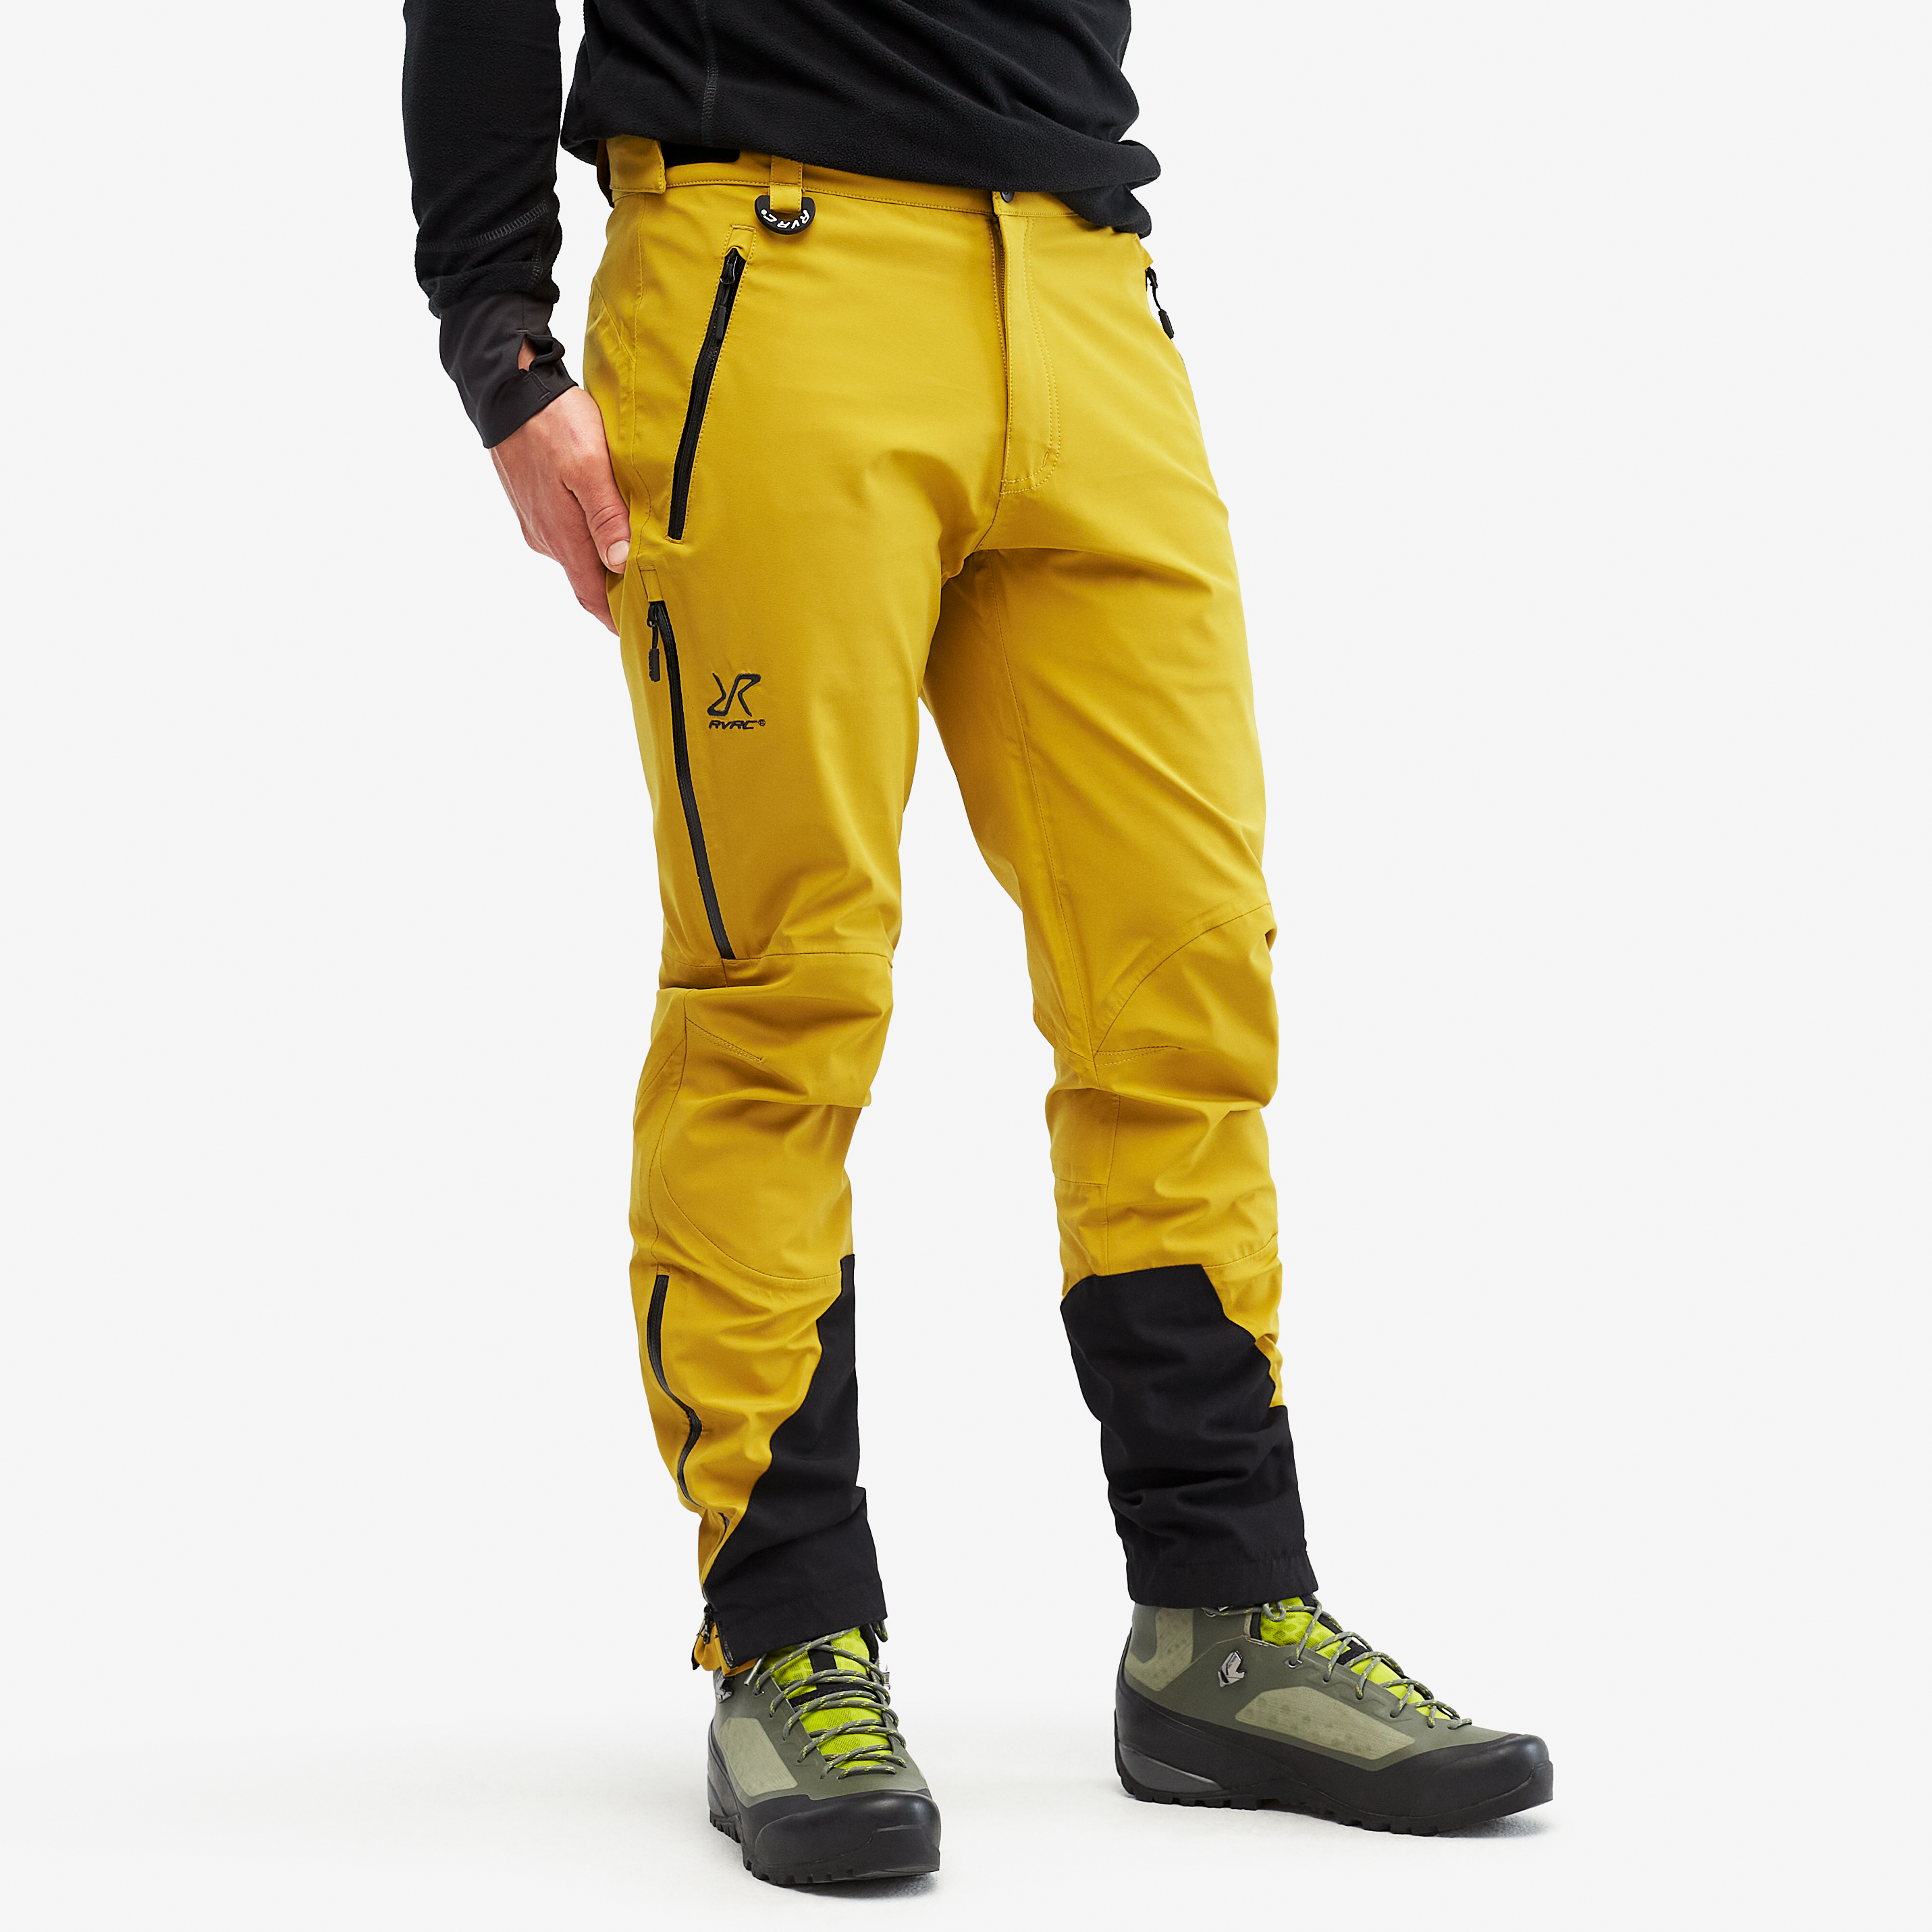 Cyclone Rescue Pants Olive Oil Men